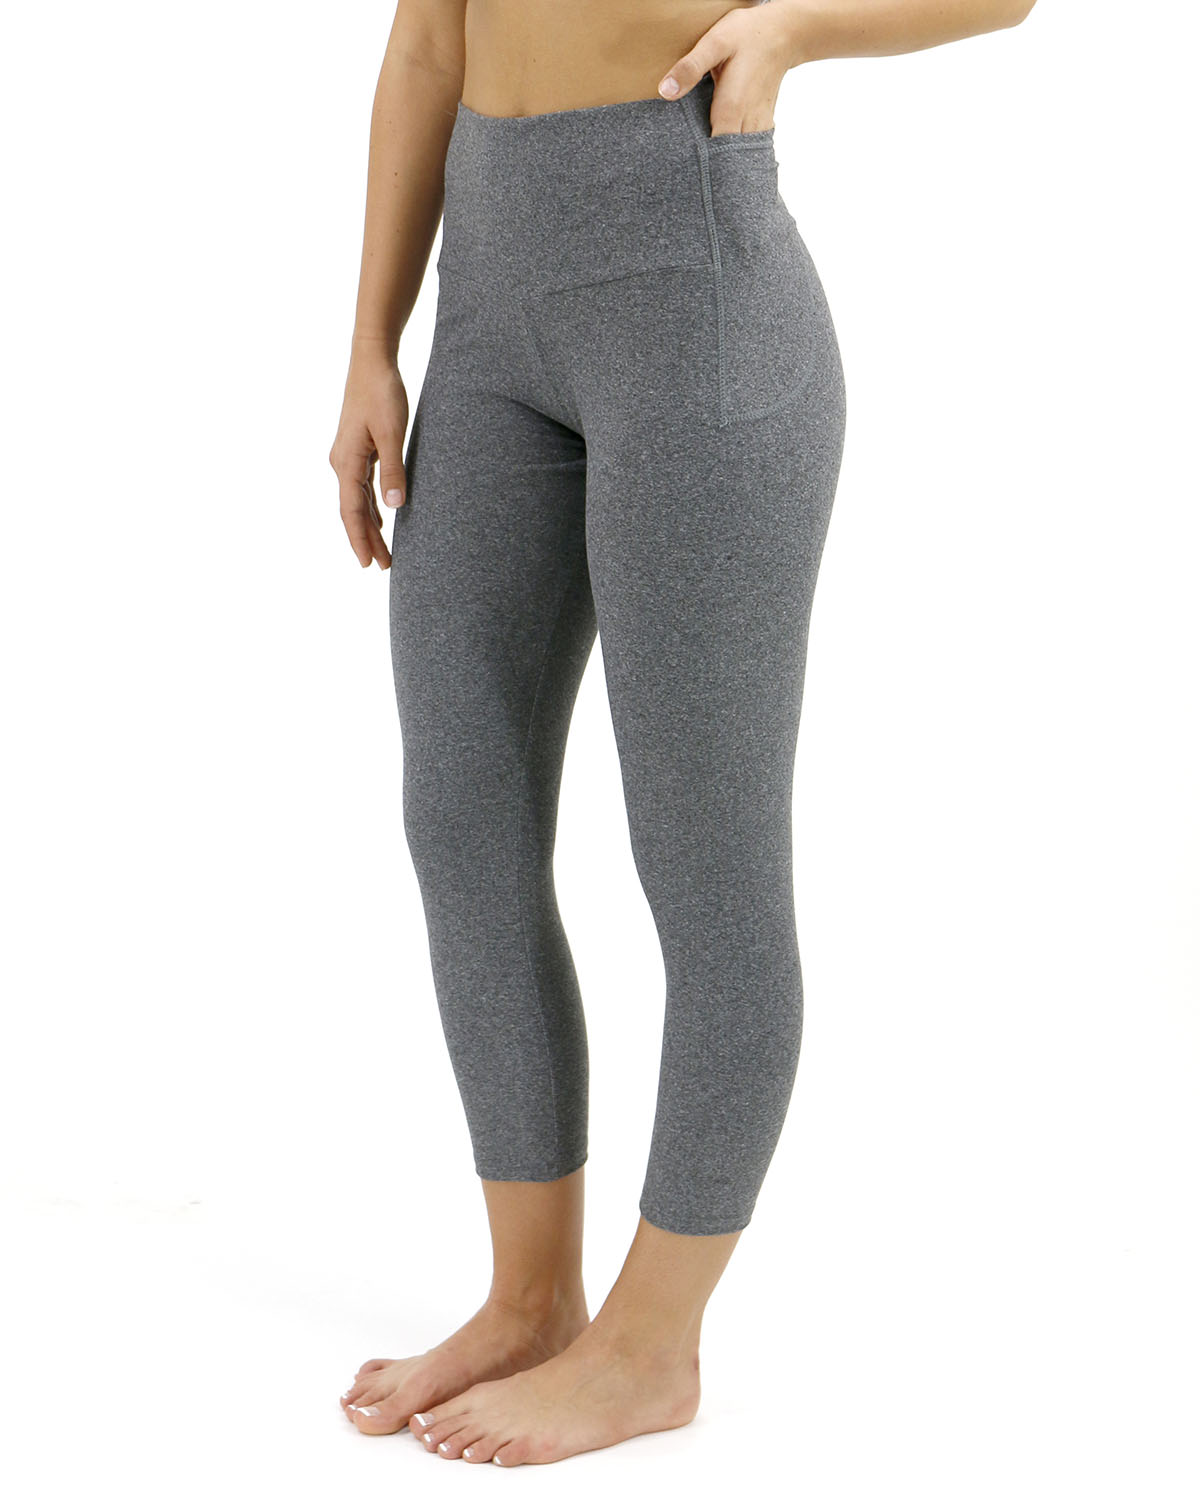 Midweight Daily Leggings in Black- Pocket/No Pocket - Grace and Lace